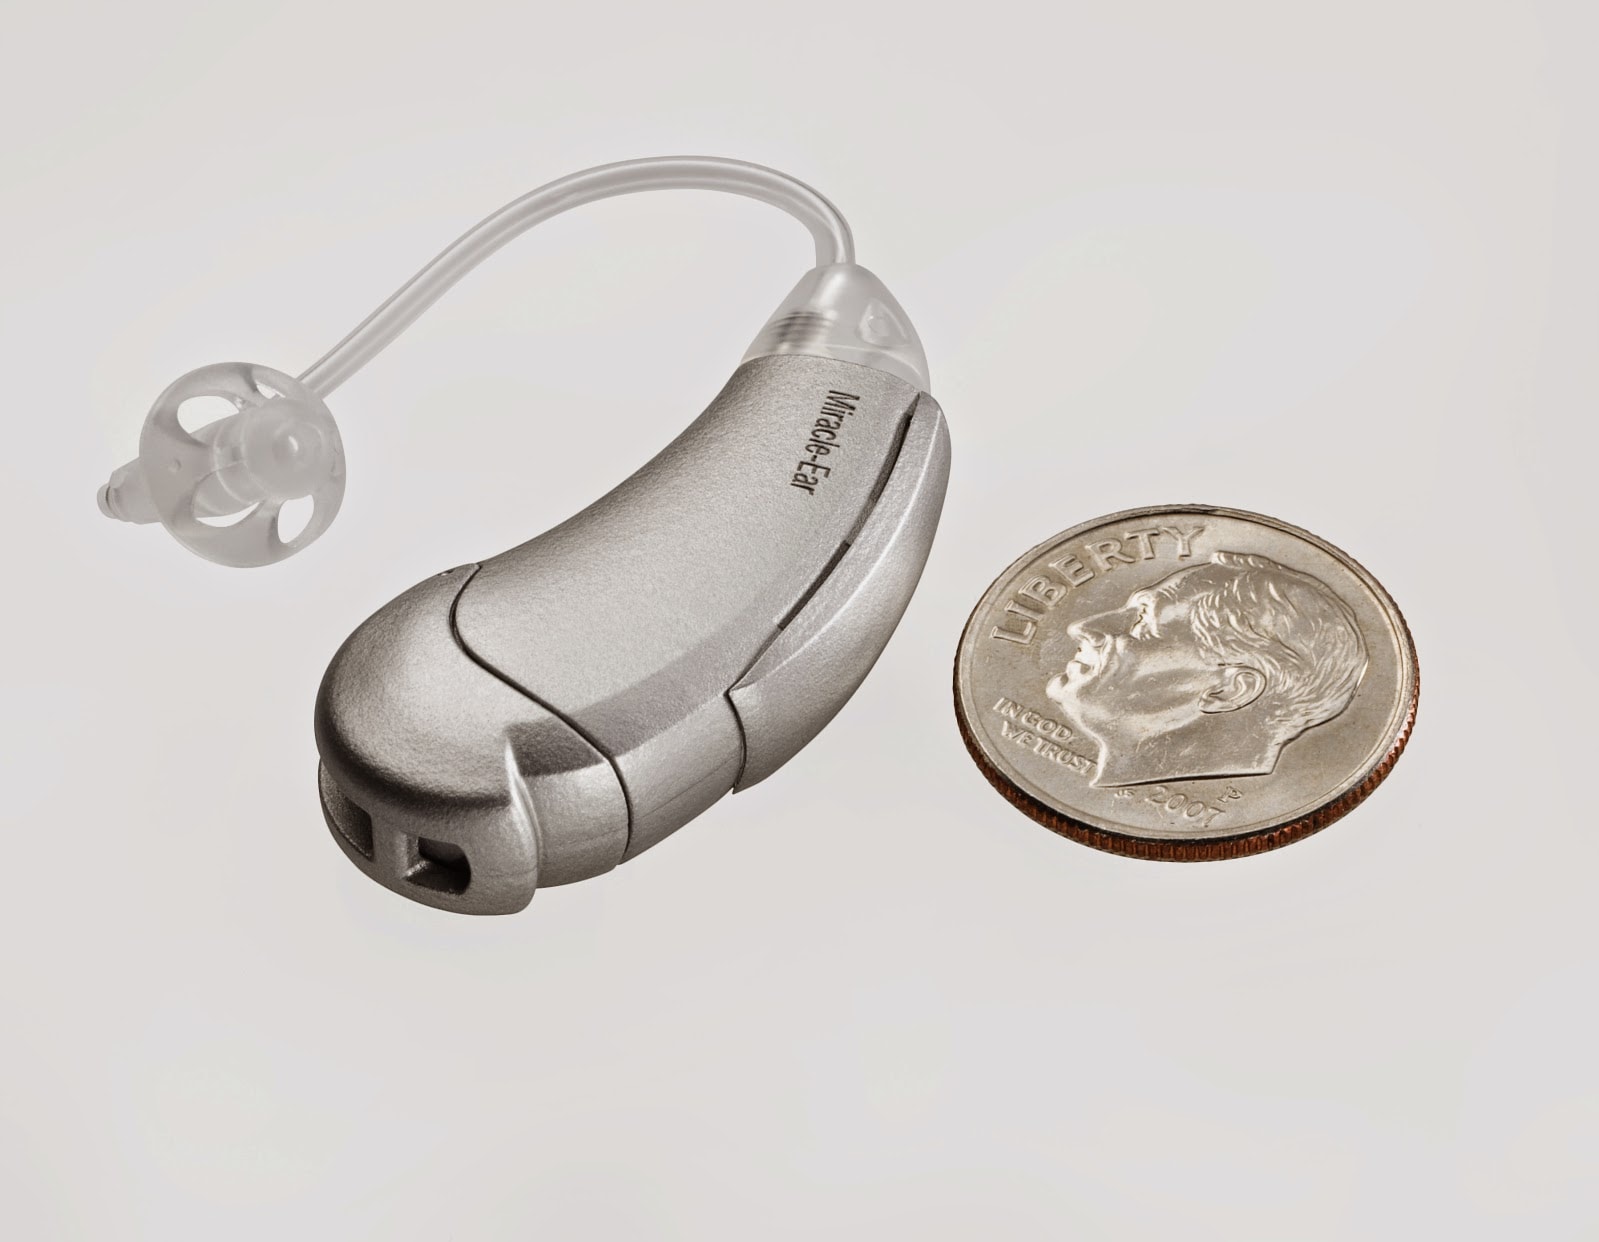 Miracle-Ear Hearing Aid Center - Aitkin (MN 56431), US, micro hearing aid